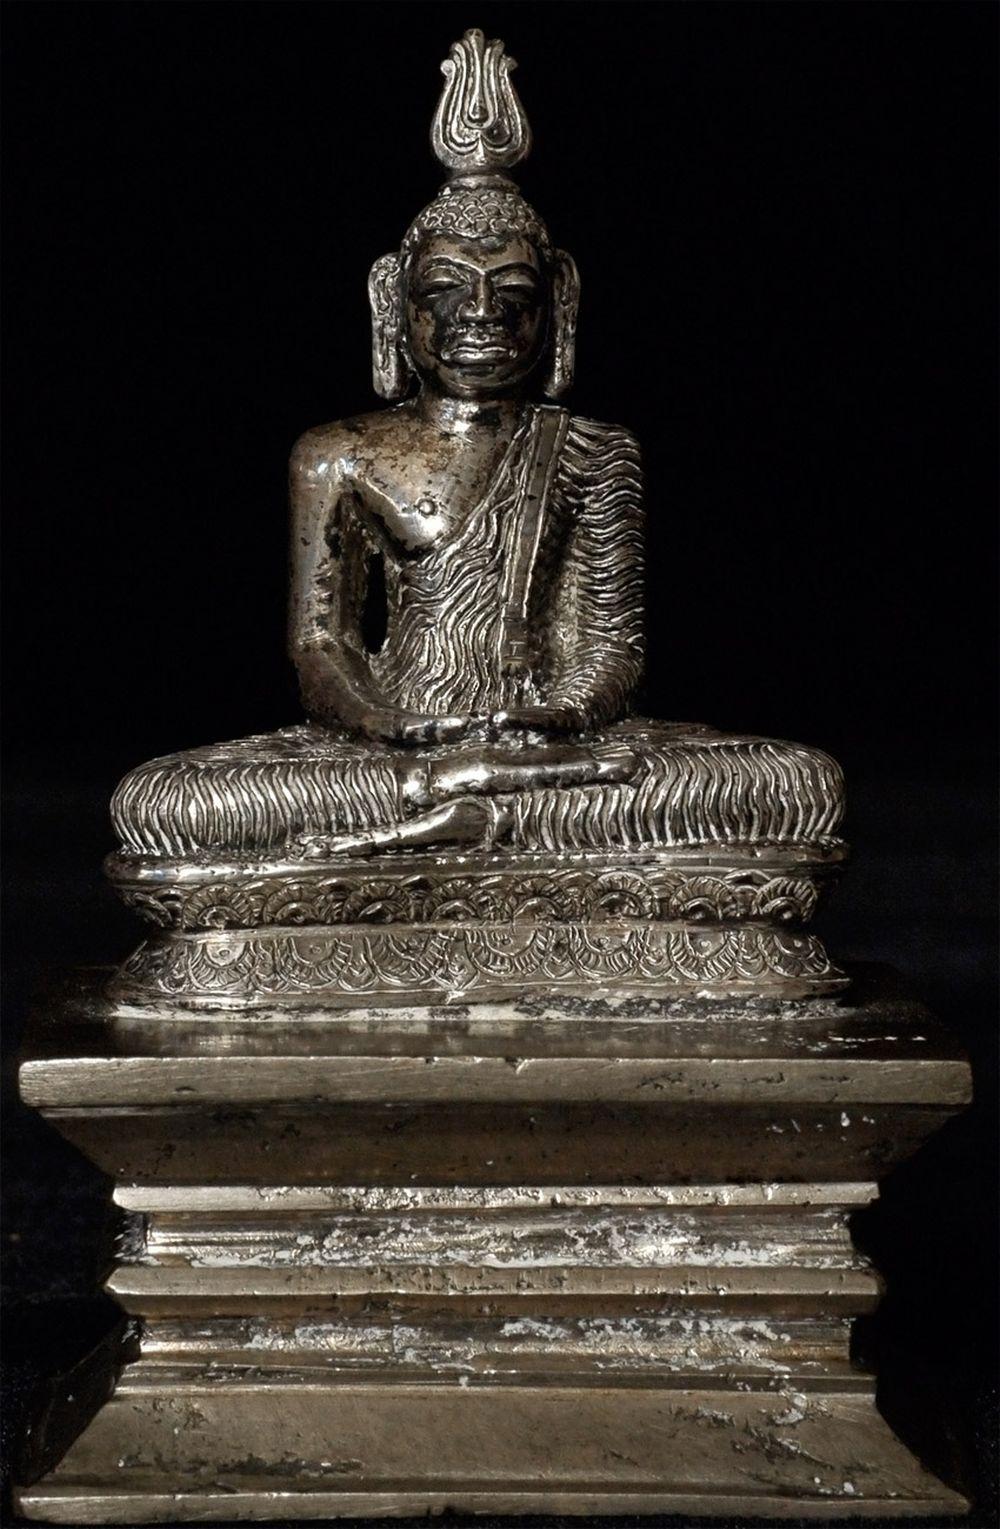 Solid silver 18thC Lankan Buddha on a silver-colored metal base. From the great early 20thC U.S. Mid-West Aseldorf collection (as per previous owner- purchased at an auction of some of the smaller Aseldorf pieces in Chicago at auction in 1990's-many